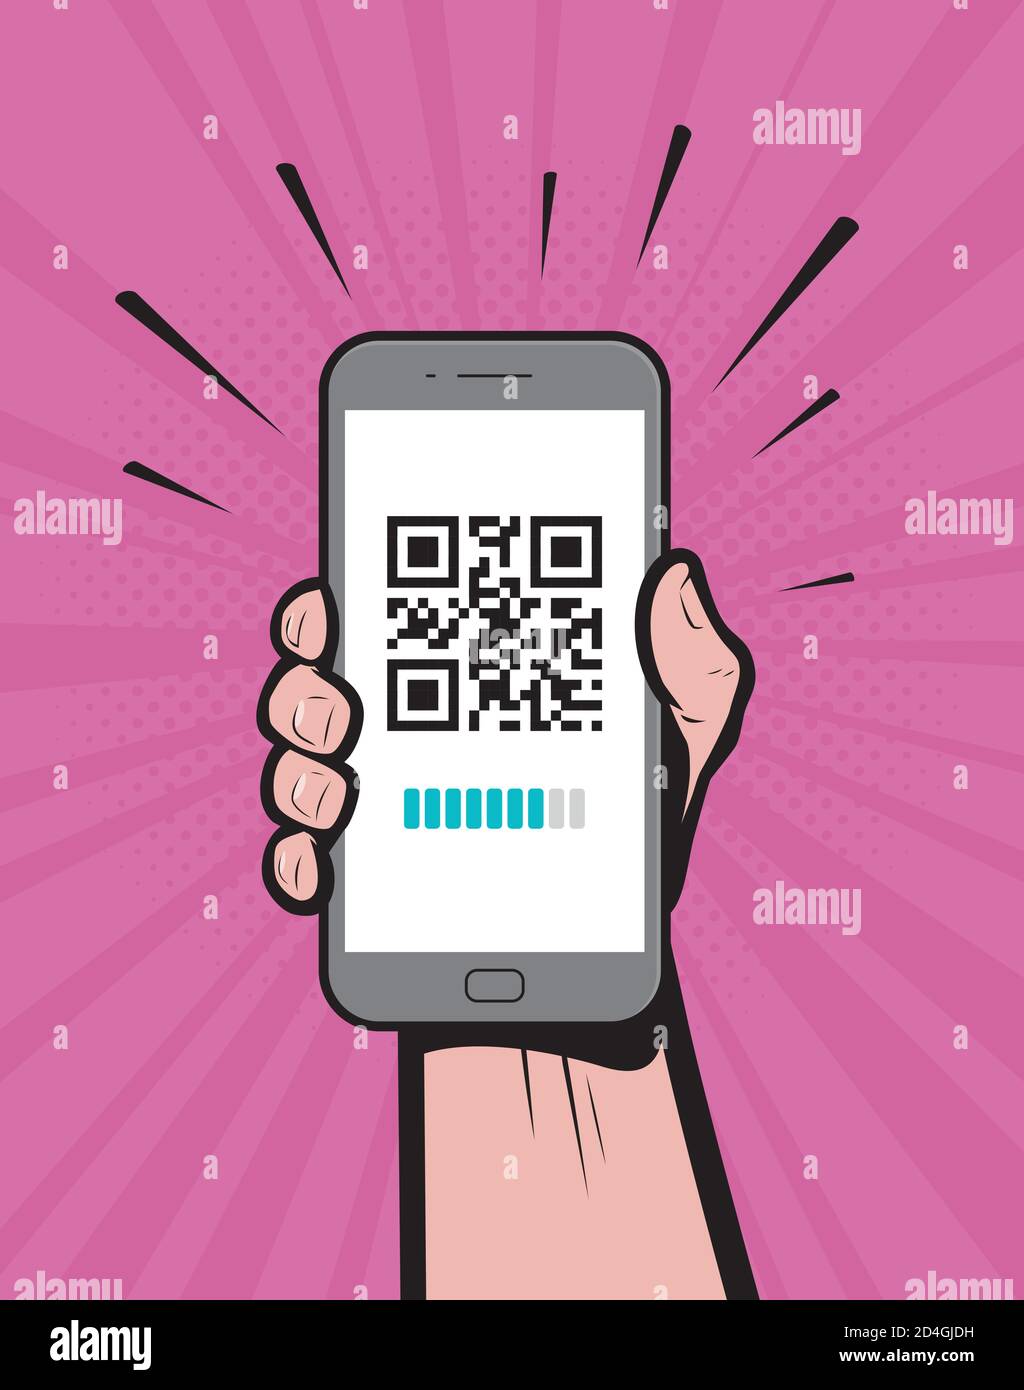 Hand holding a phone with qr code on the screen. Vector illustration Stock Vector